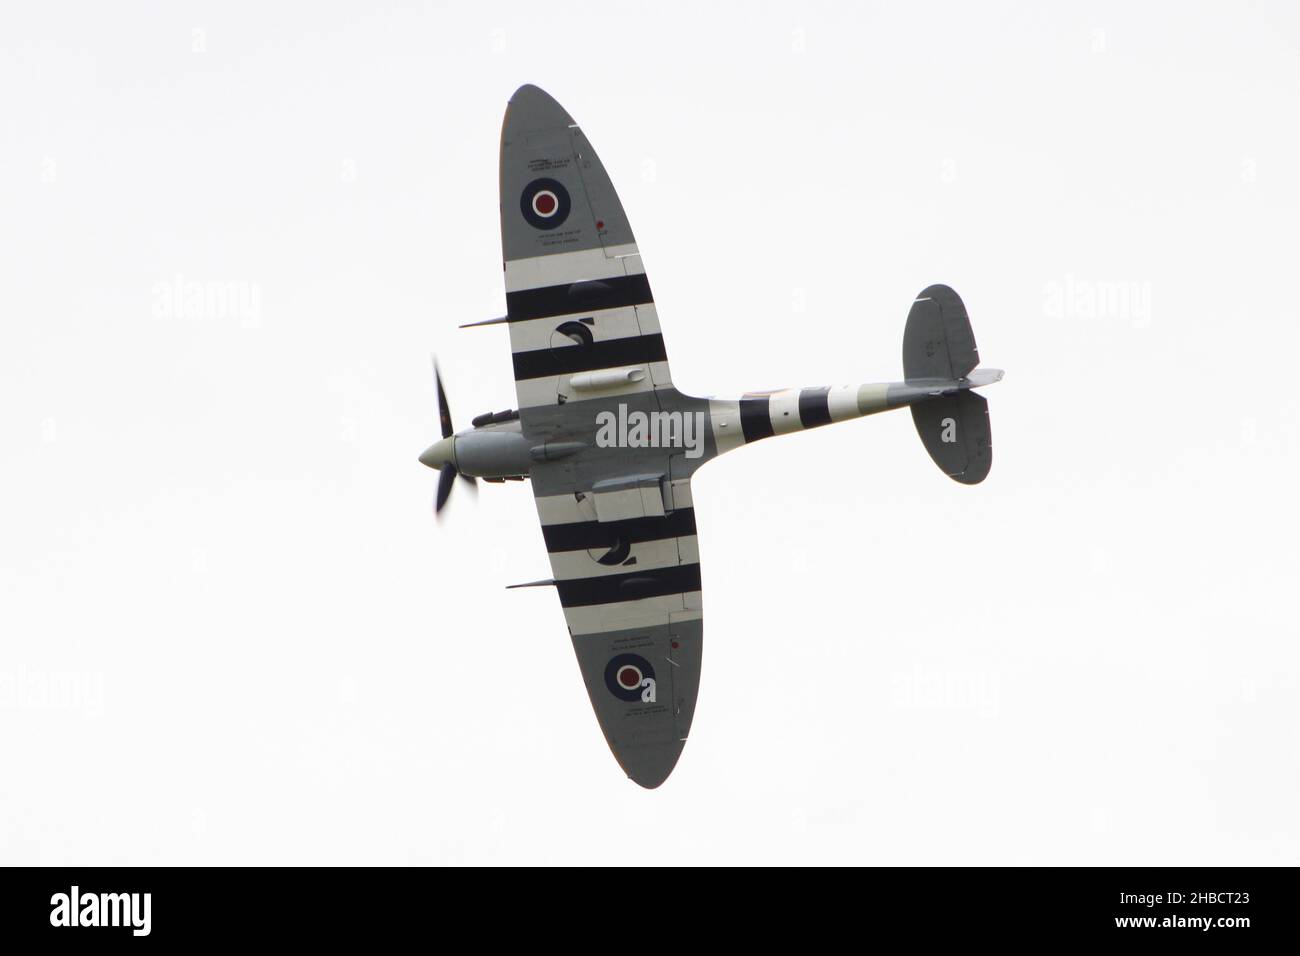 AB910, a Supermarine Spitfire Vb operated by the Royal Air Force's Battle of Britain Memorial Flight (BBMF), displaying over East Fortune in 2016. Stock Photo